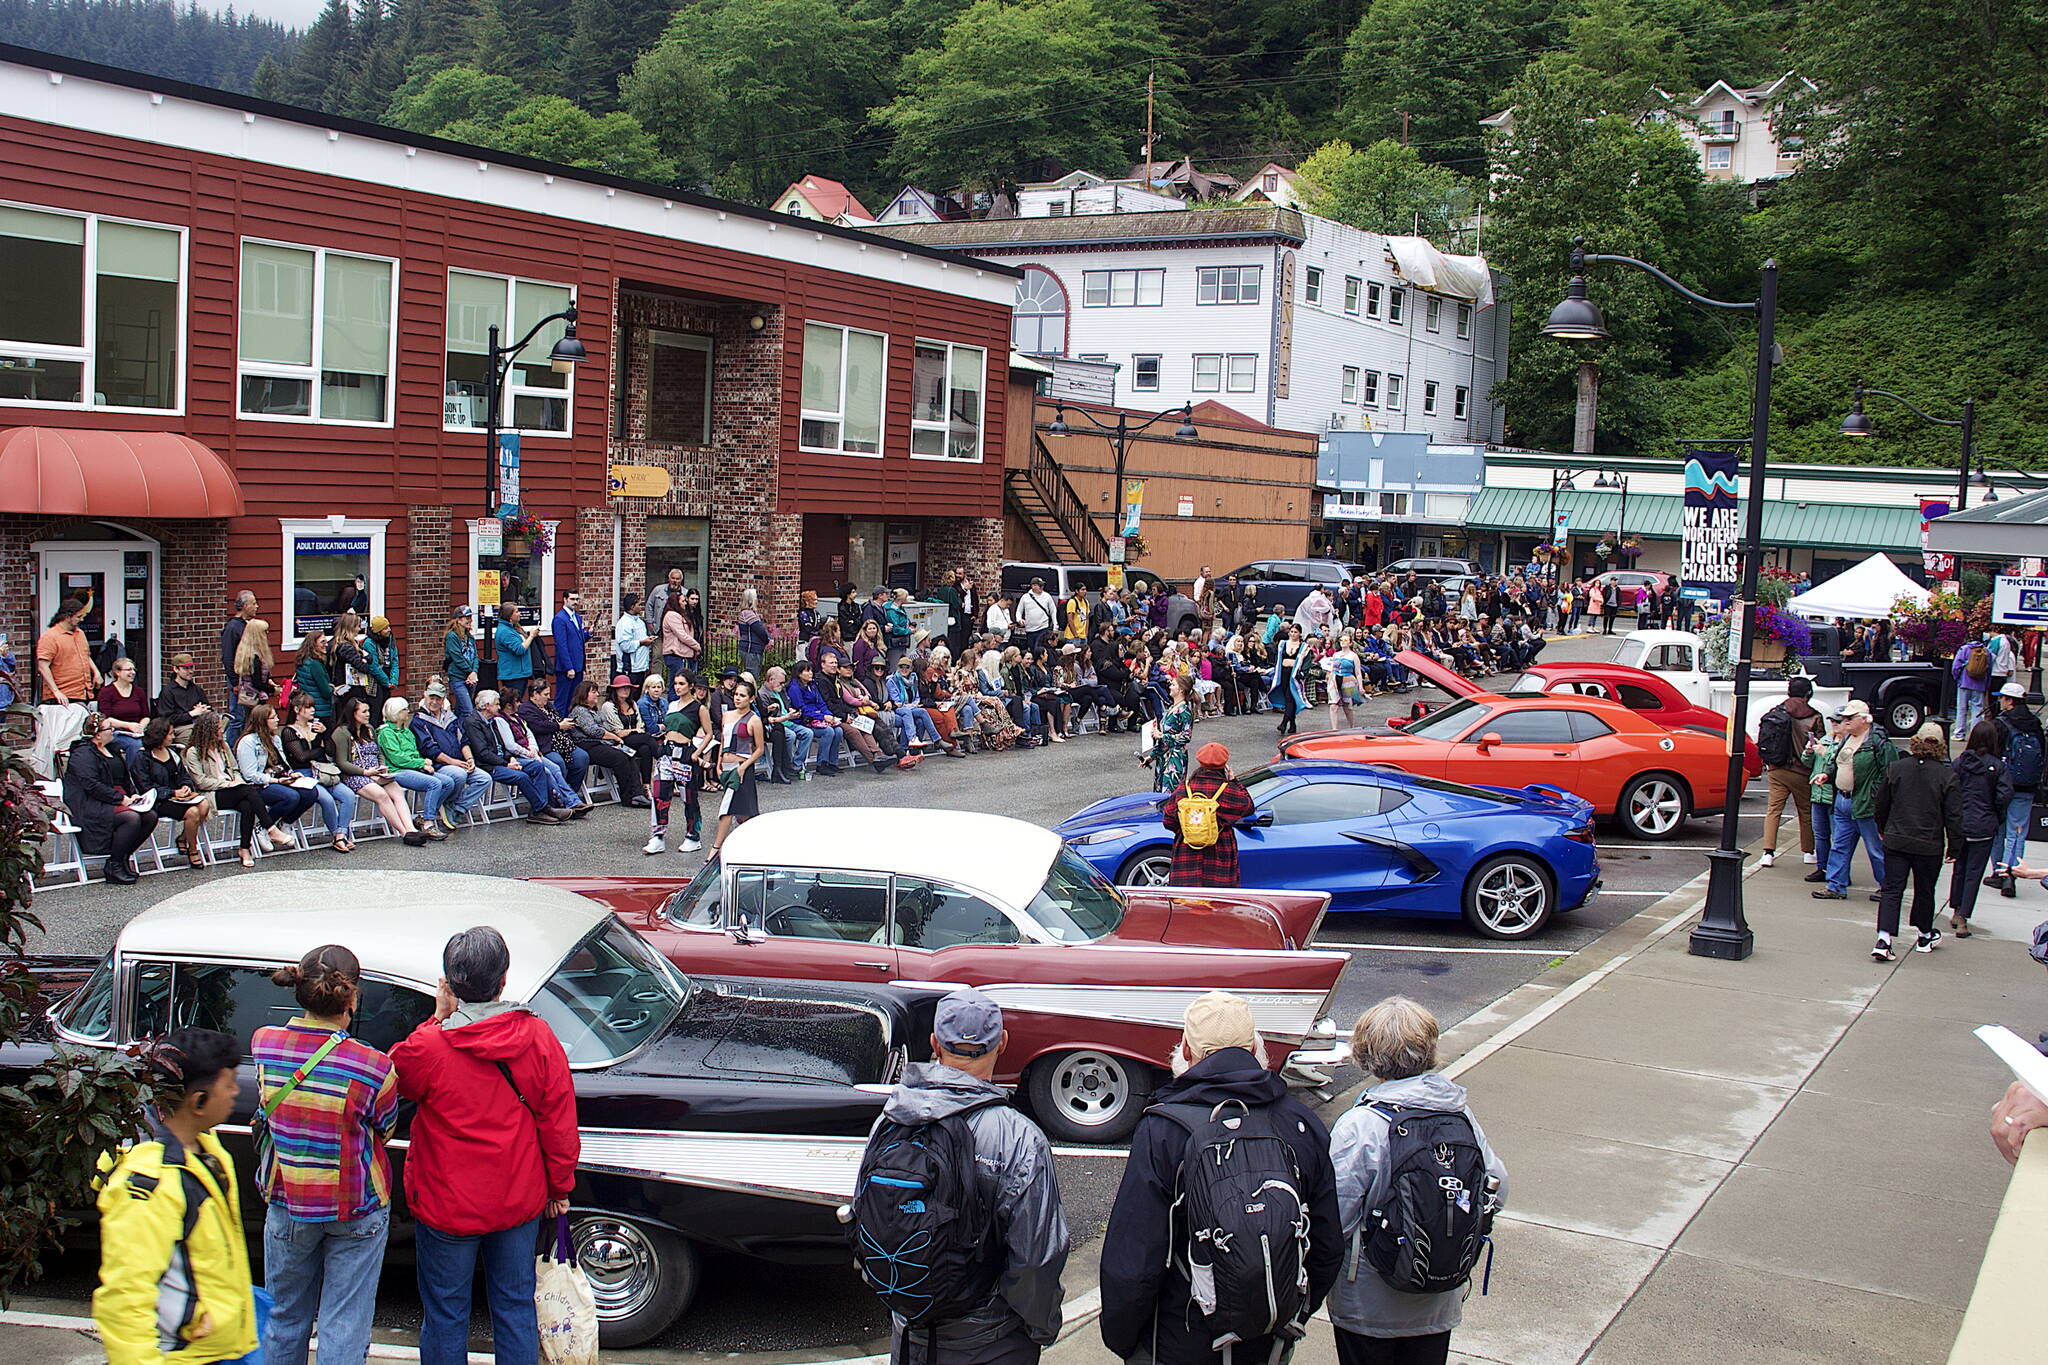 More than 100 residents, tourists and other observers line Ferry Way to watch Alaska Fashion Weeks outdoor runway show in downtown Juneau on Saturday. (Mark Sabbatini / Juneau Empire)